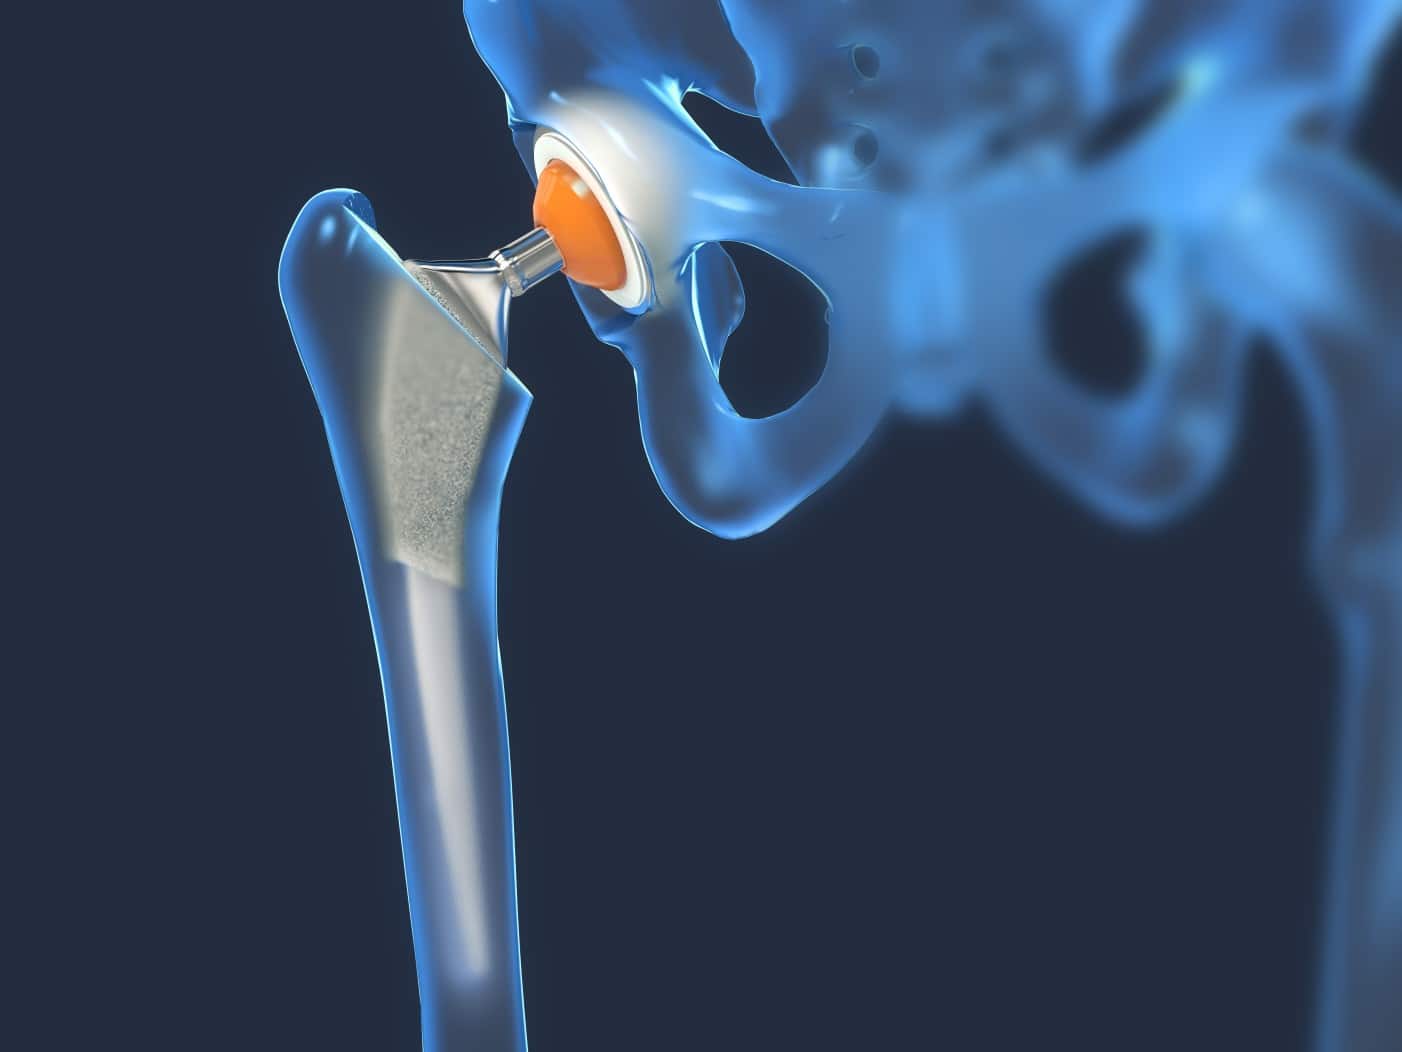 Hip Replacement Systems